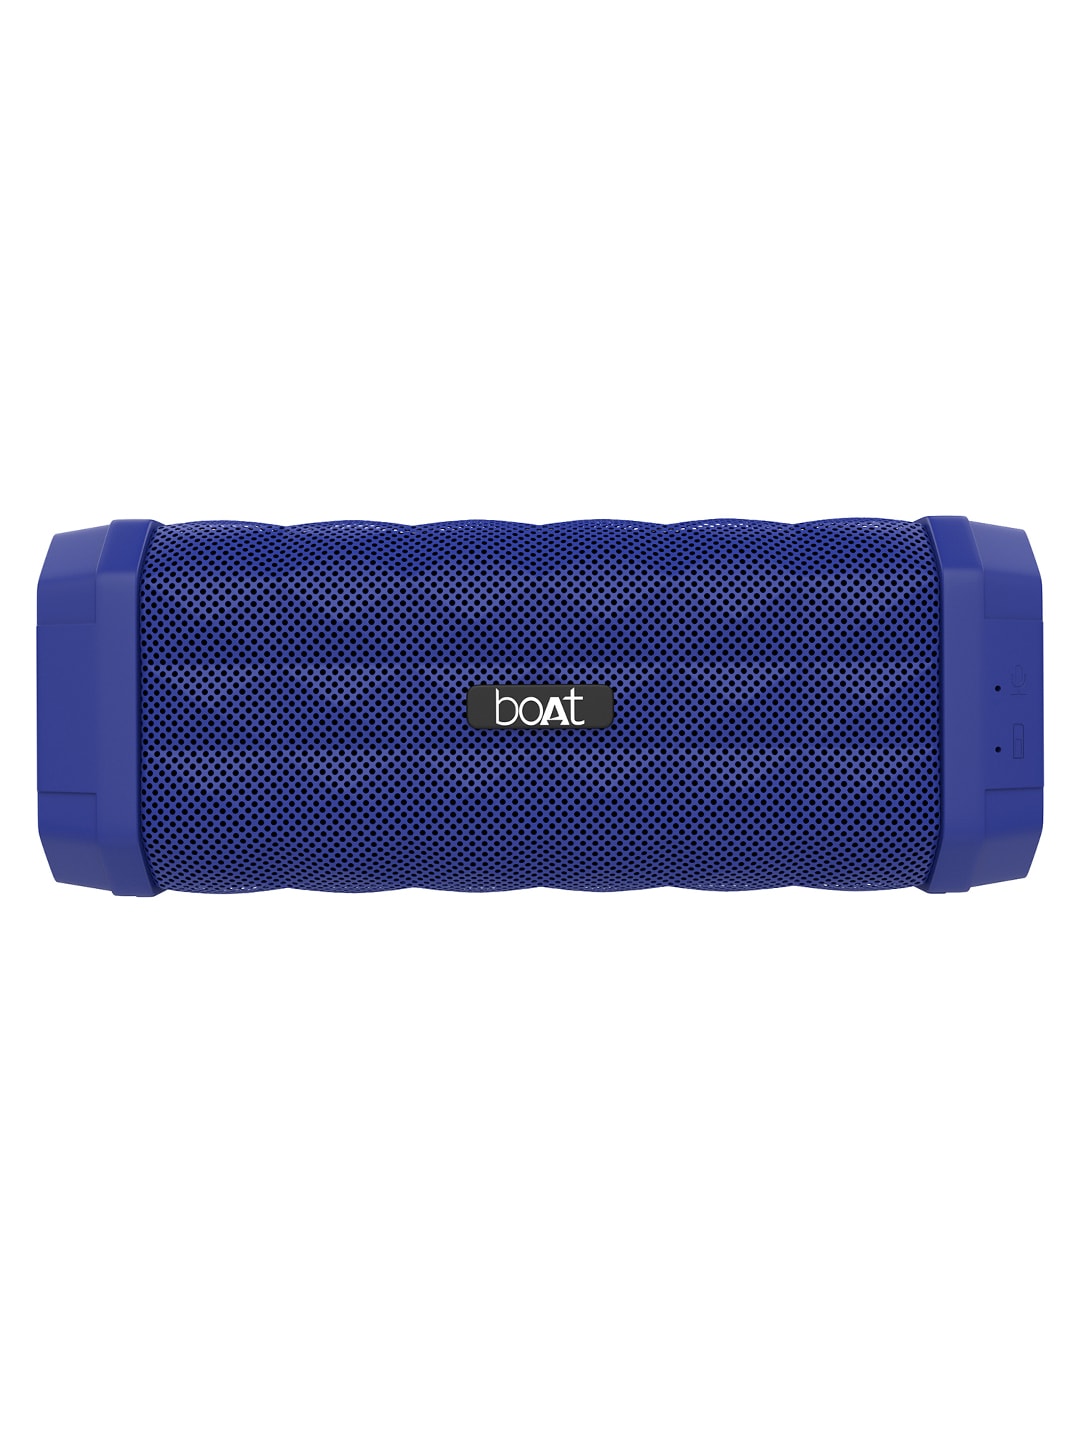 boAt Stone 650 10W Navy Blue Stereo Wireless Speaker with IPX5 & Up to 7H Playtime Price in India